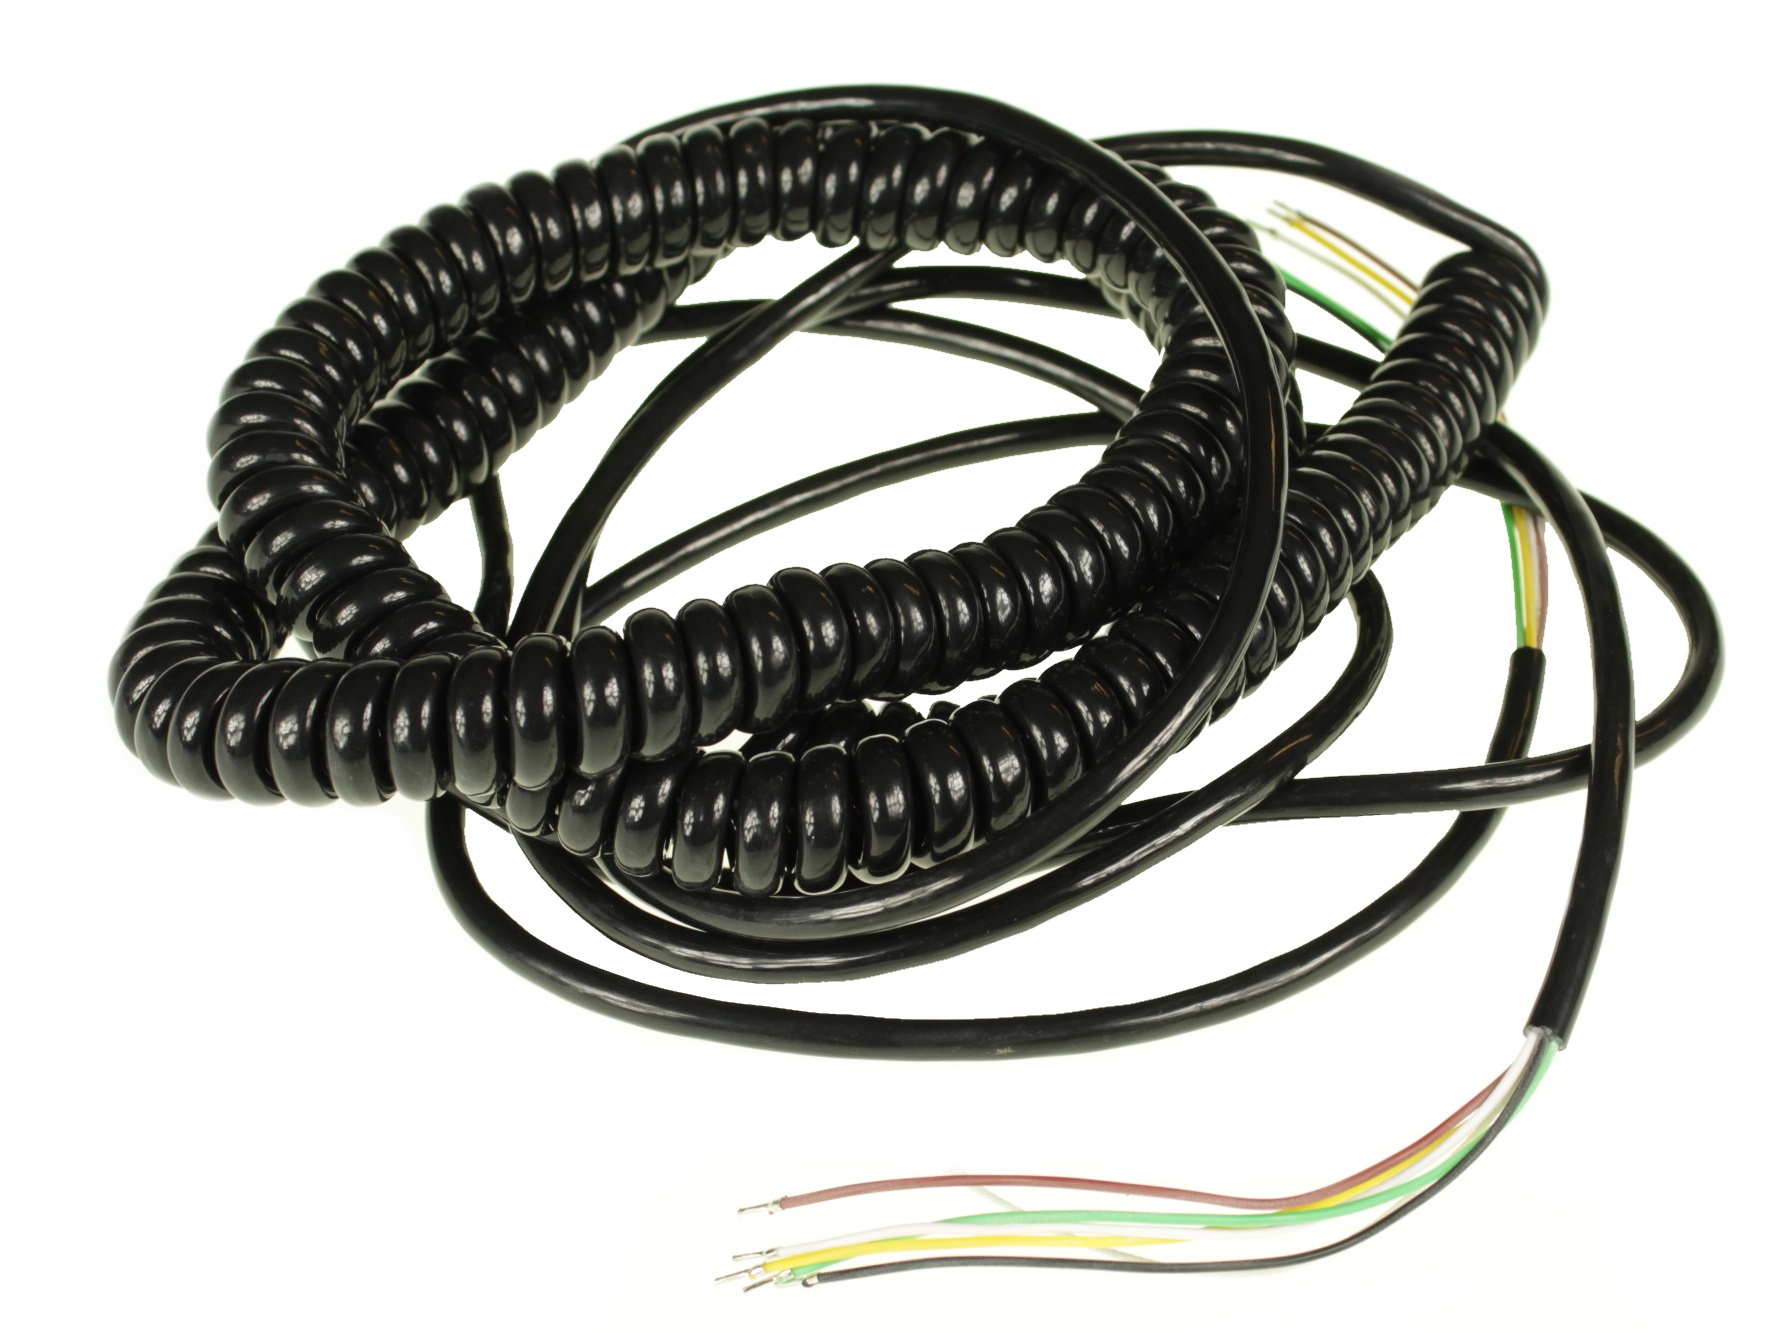 12002: Spiral cable 0.75 x 7 heavy-duty